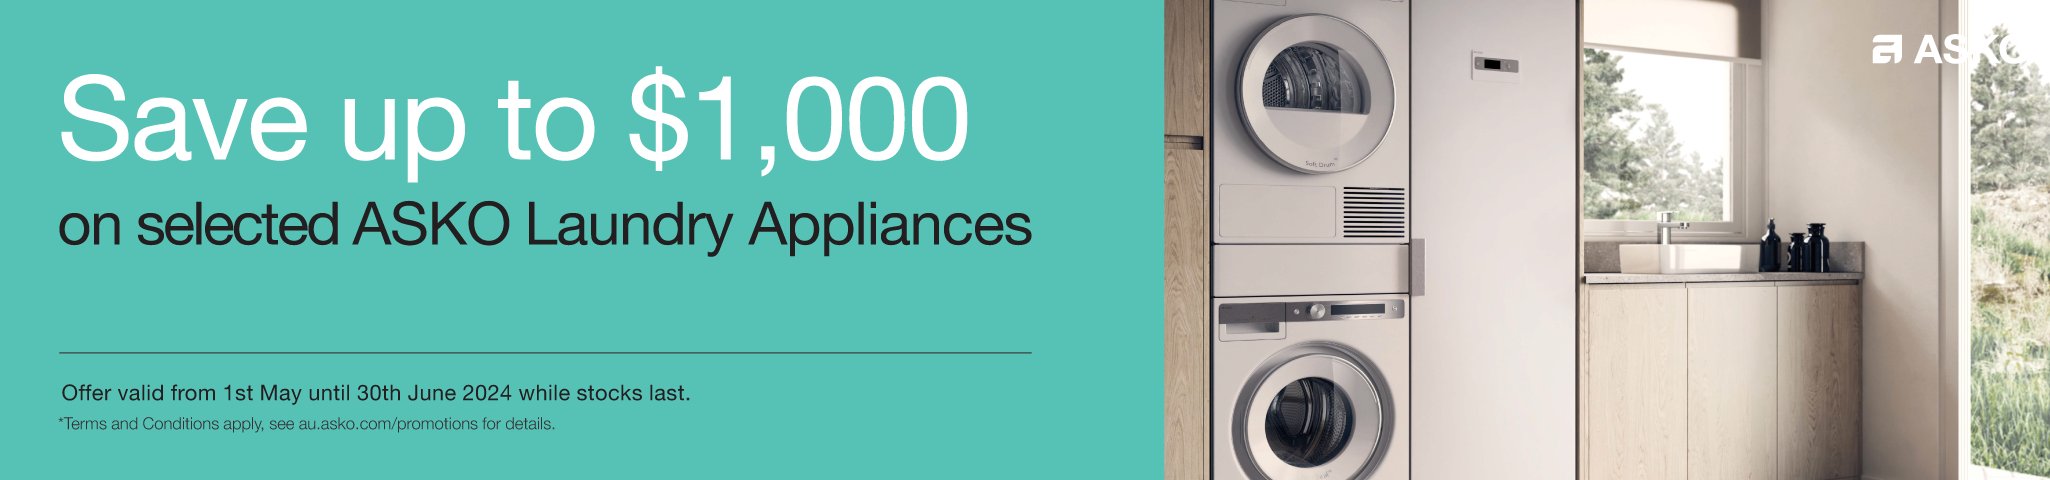 Save Up To $1,000 On Selected ASKO Laundry Appliances*